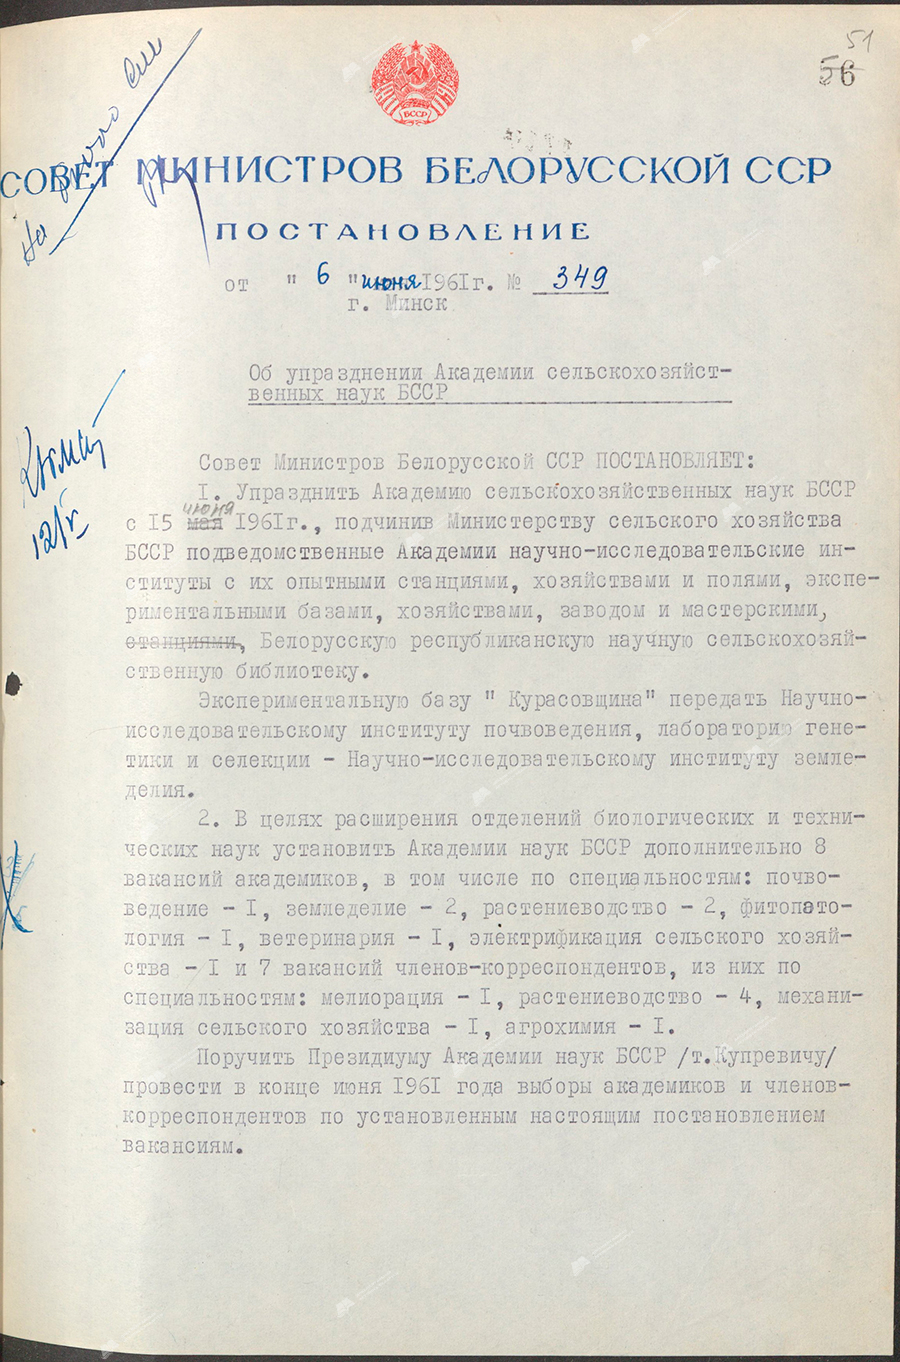 Resolution No. 349 «On the abolition of the Academy of Agricultural Sciences of the BSSR»-стр. 0